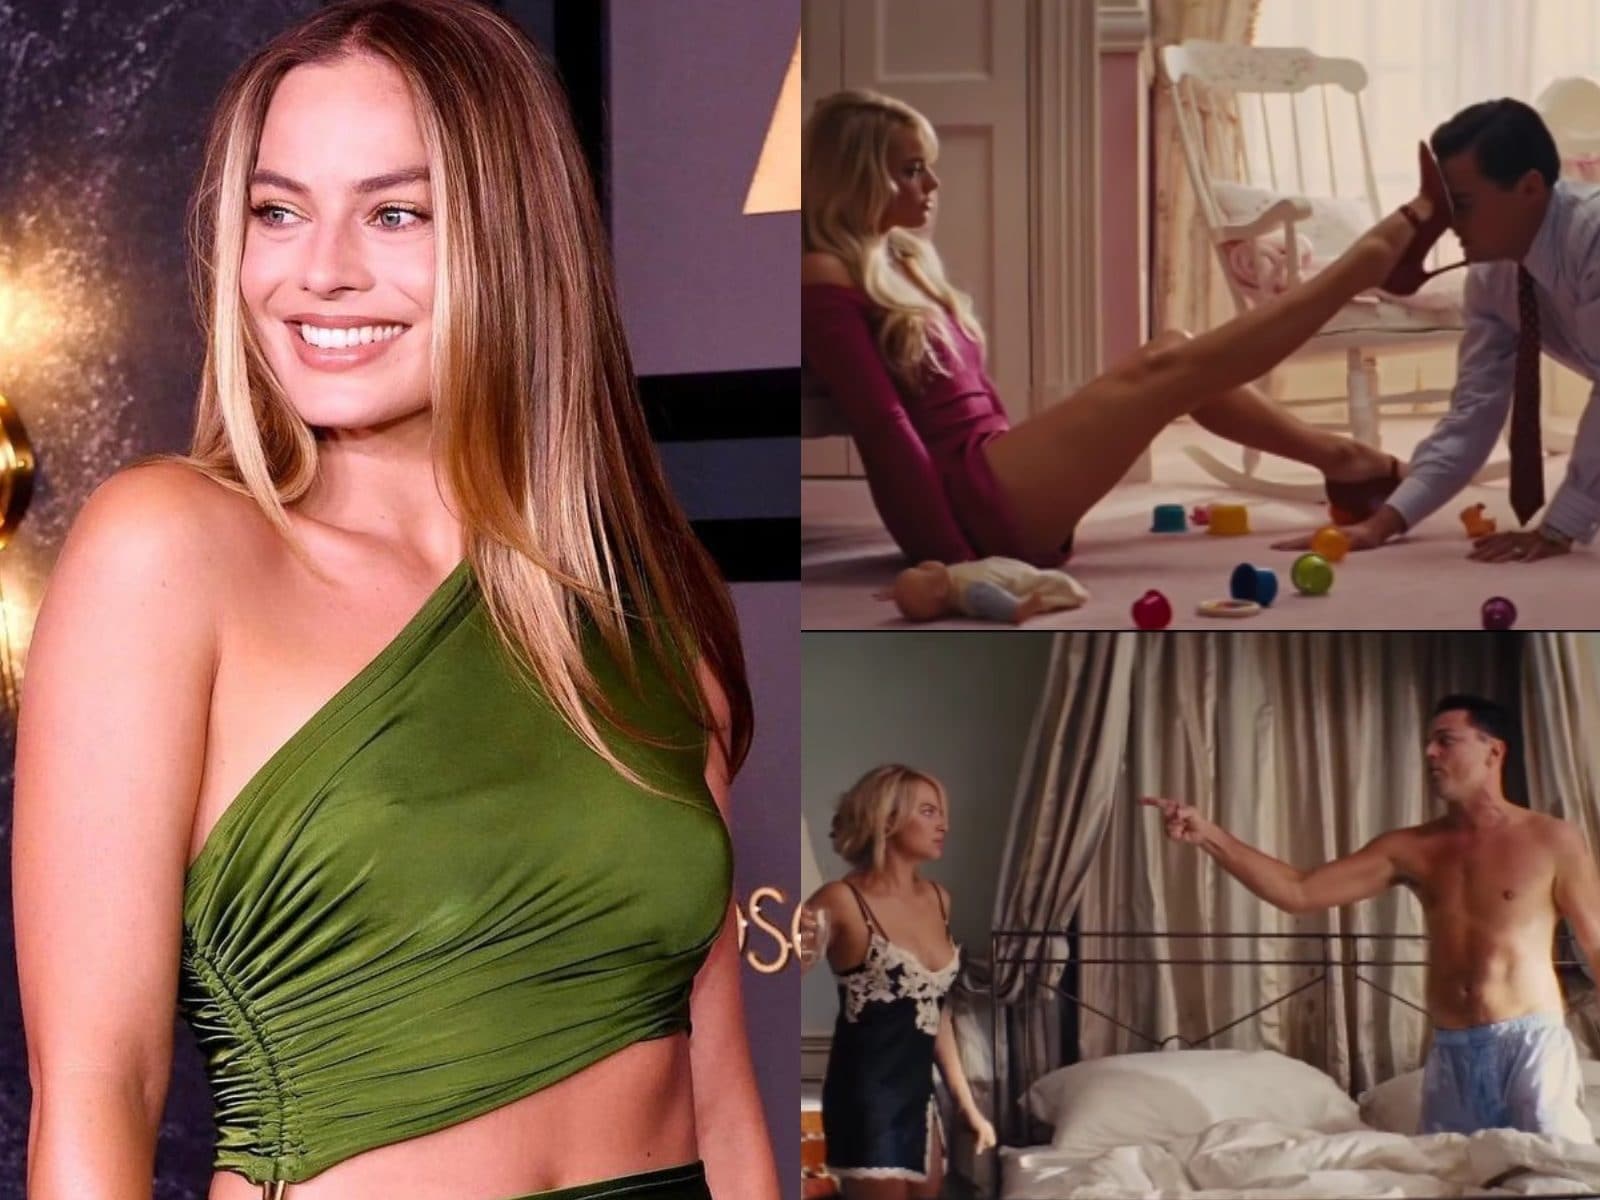 devin carrick recommends margot robbie nude wolf pic